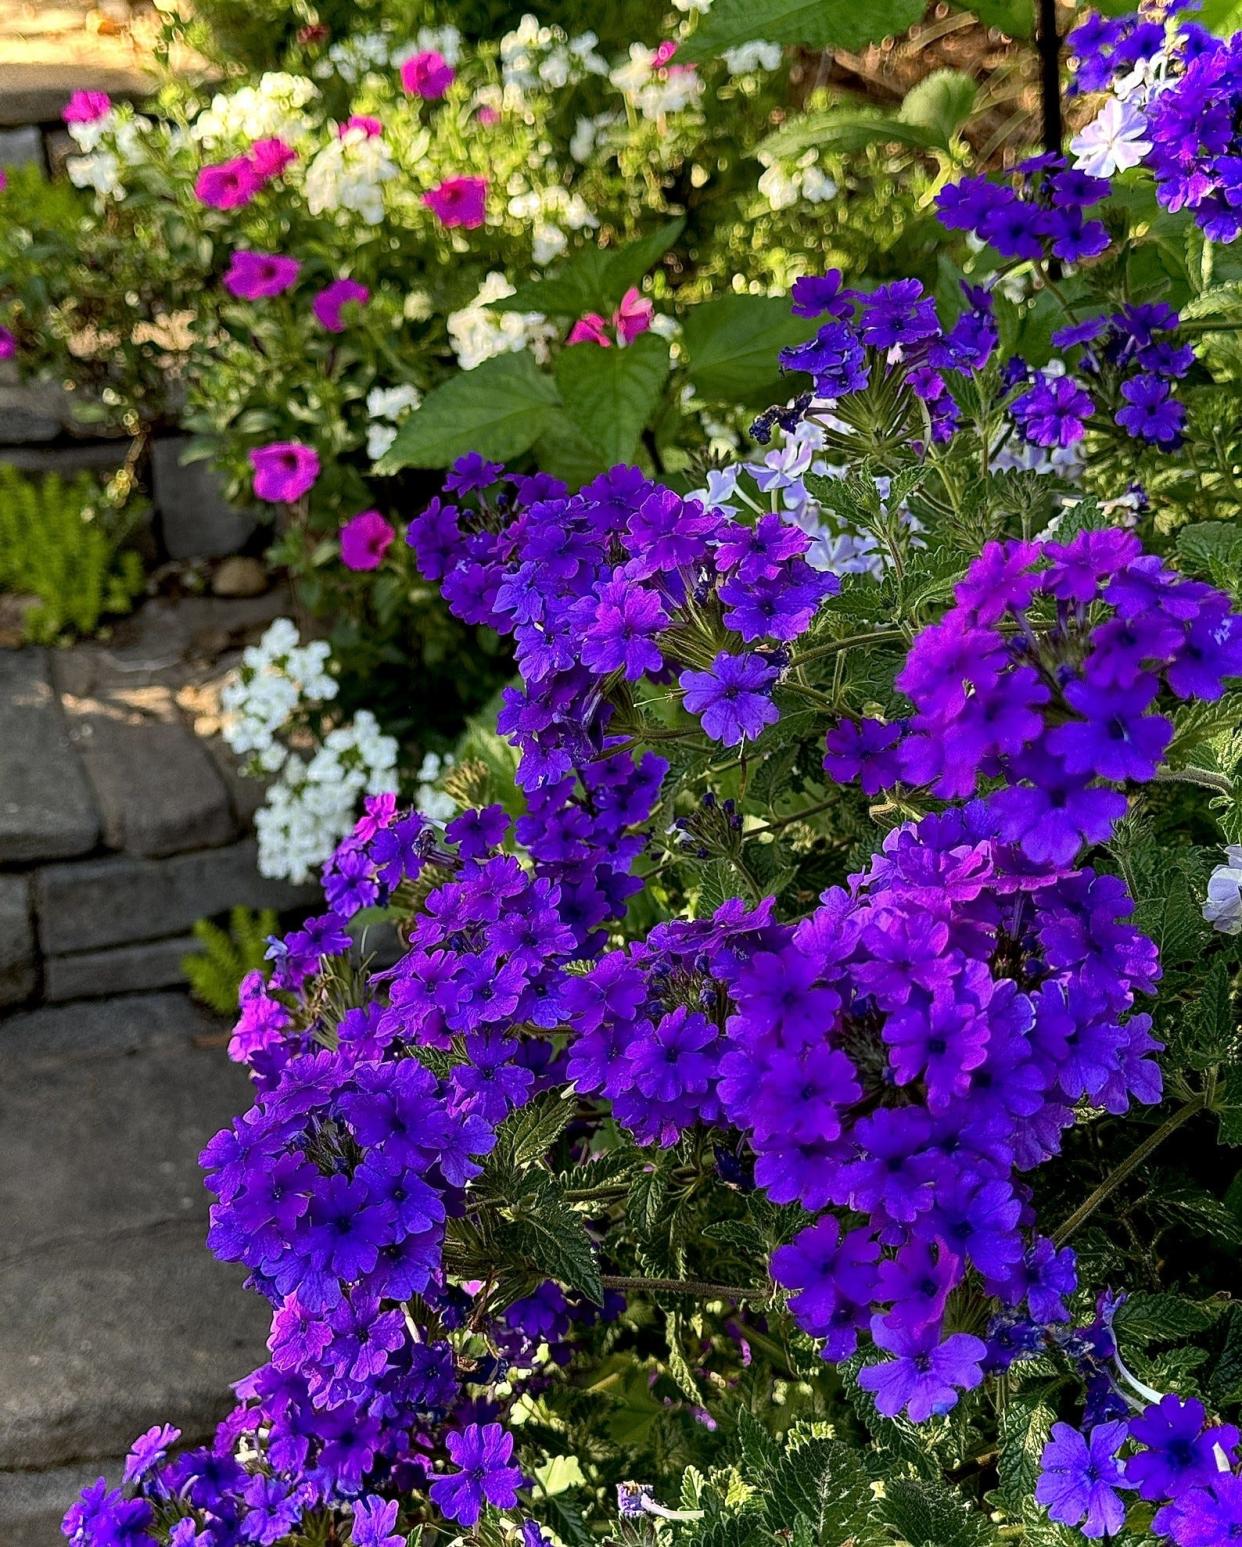 Superbena Cobalt verbena has won awards from north to south like Top Performer at University of Georgia and University of Florida and Perfect Score at Michigan State it will win in your garden too.